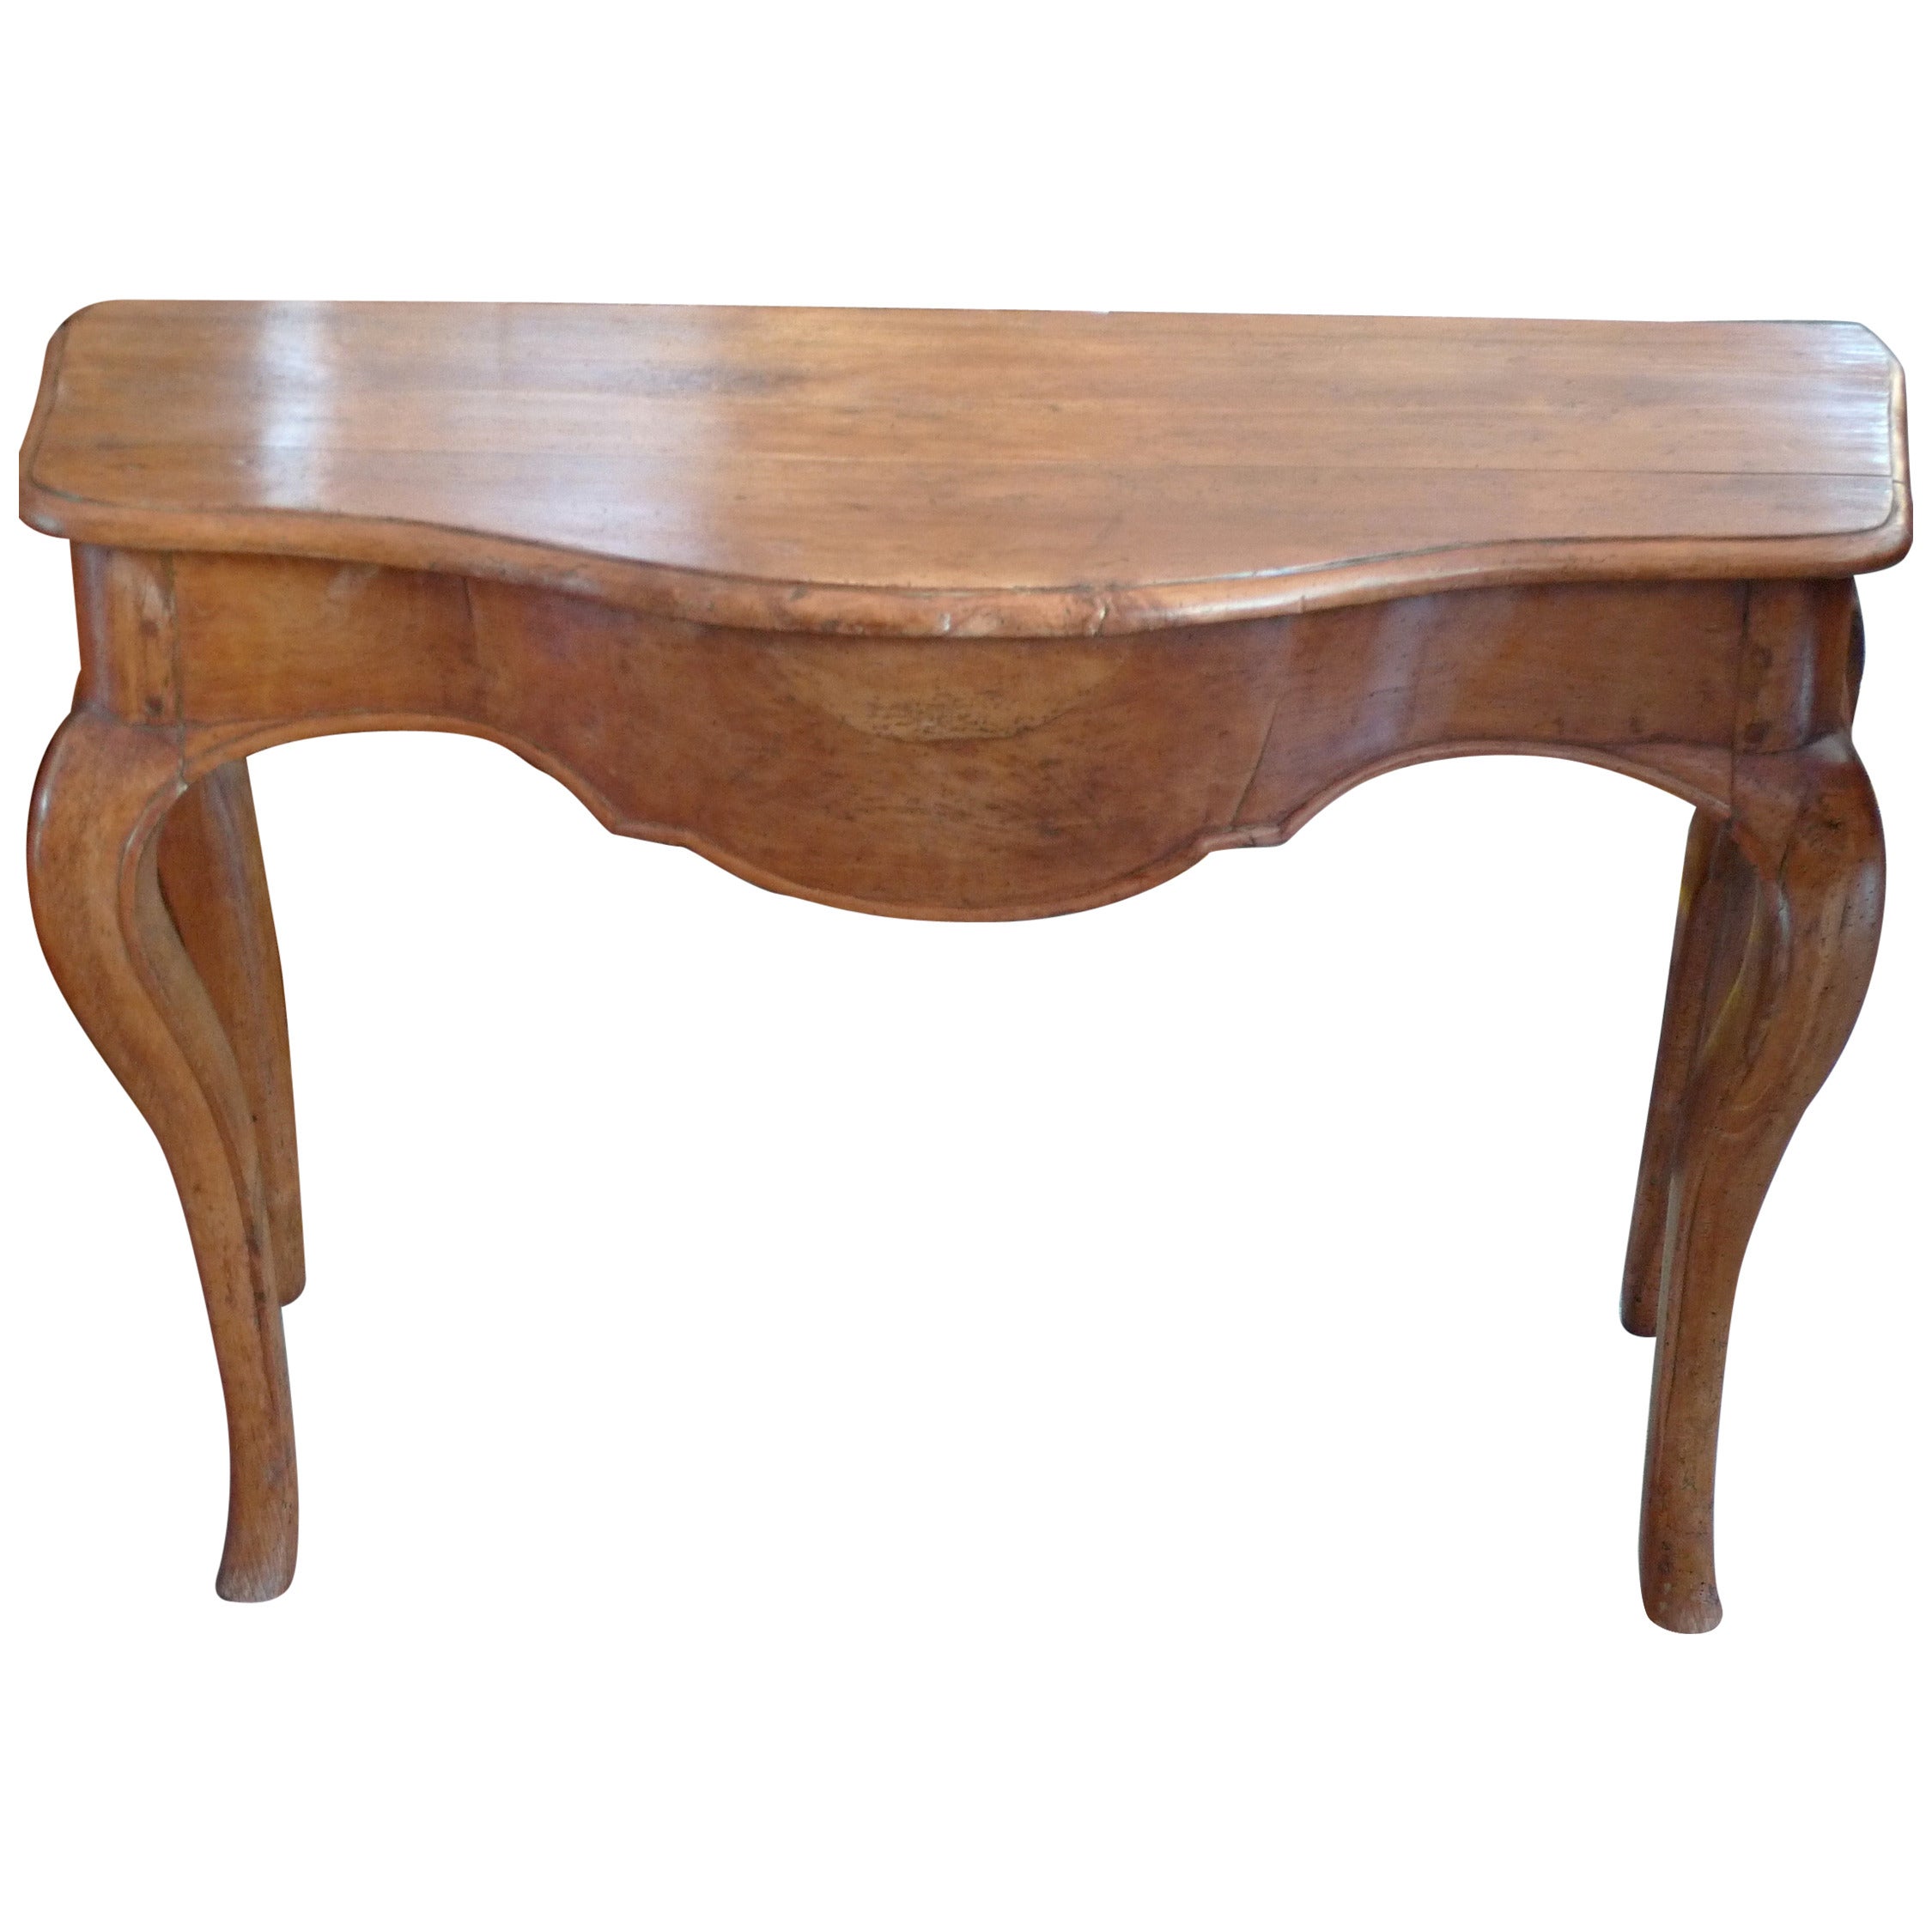 French 19th Century Stained Fruitwood Demilune Console Table